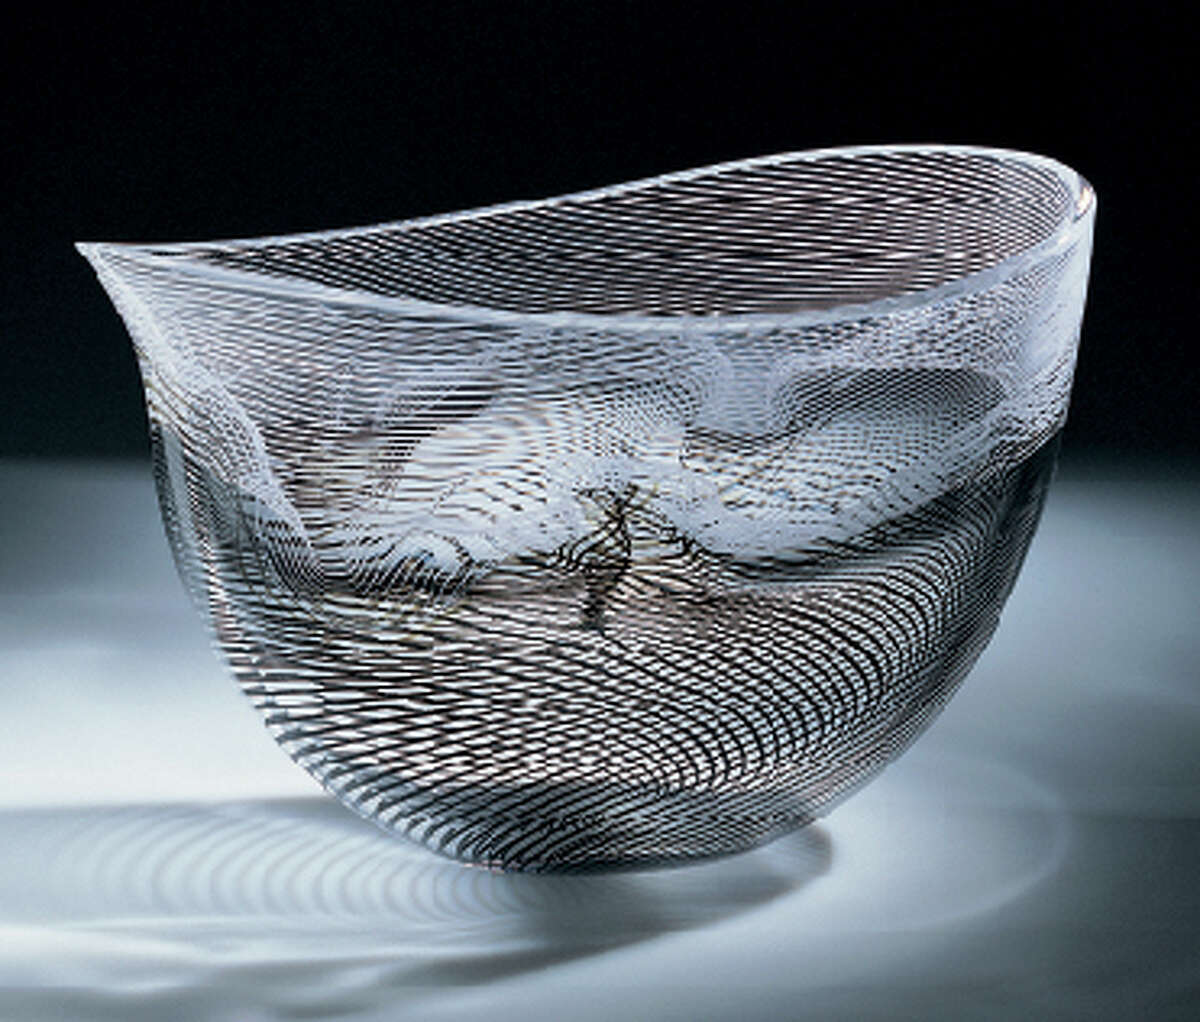 Friday is your last chance to catch "La Ragnatela/The Spiderweb: Works by Giampaolo Seguso from the Corning Museum of Glass" at the Bellarmine Museum in Fairfield. Find out more.